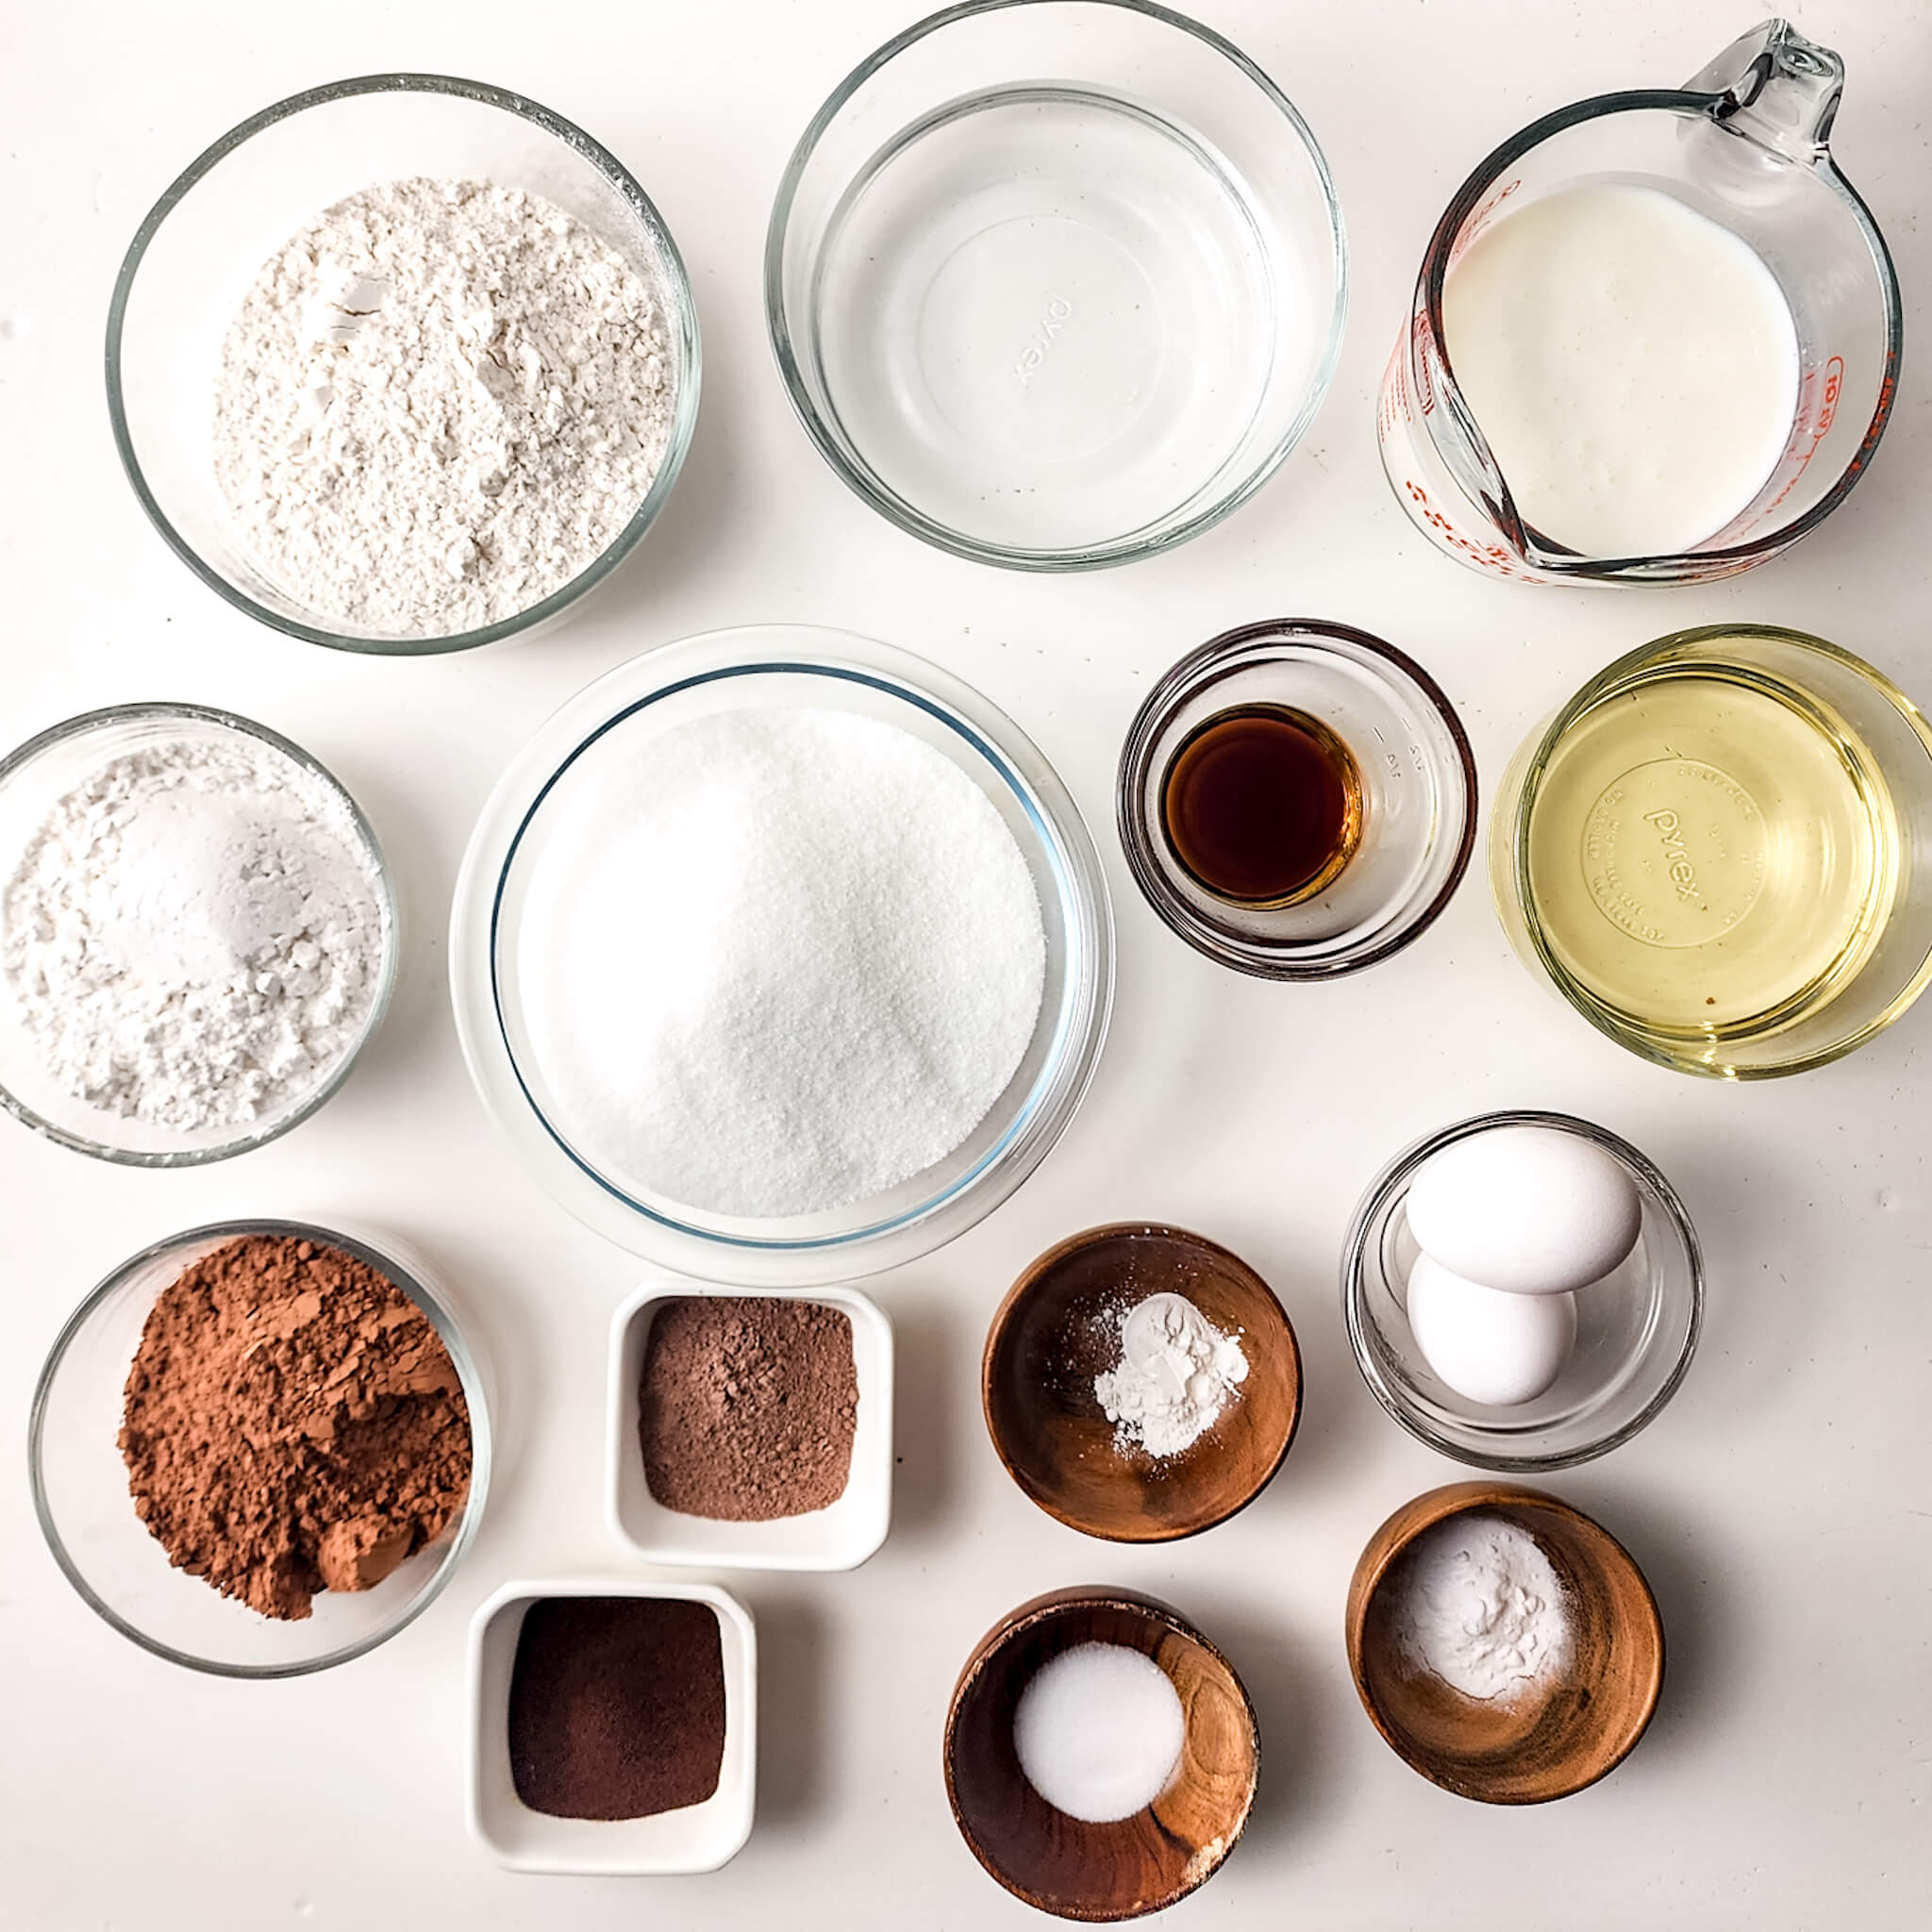 Assorted baking ingredients for the dessert arranged neatly on a white surface.